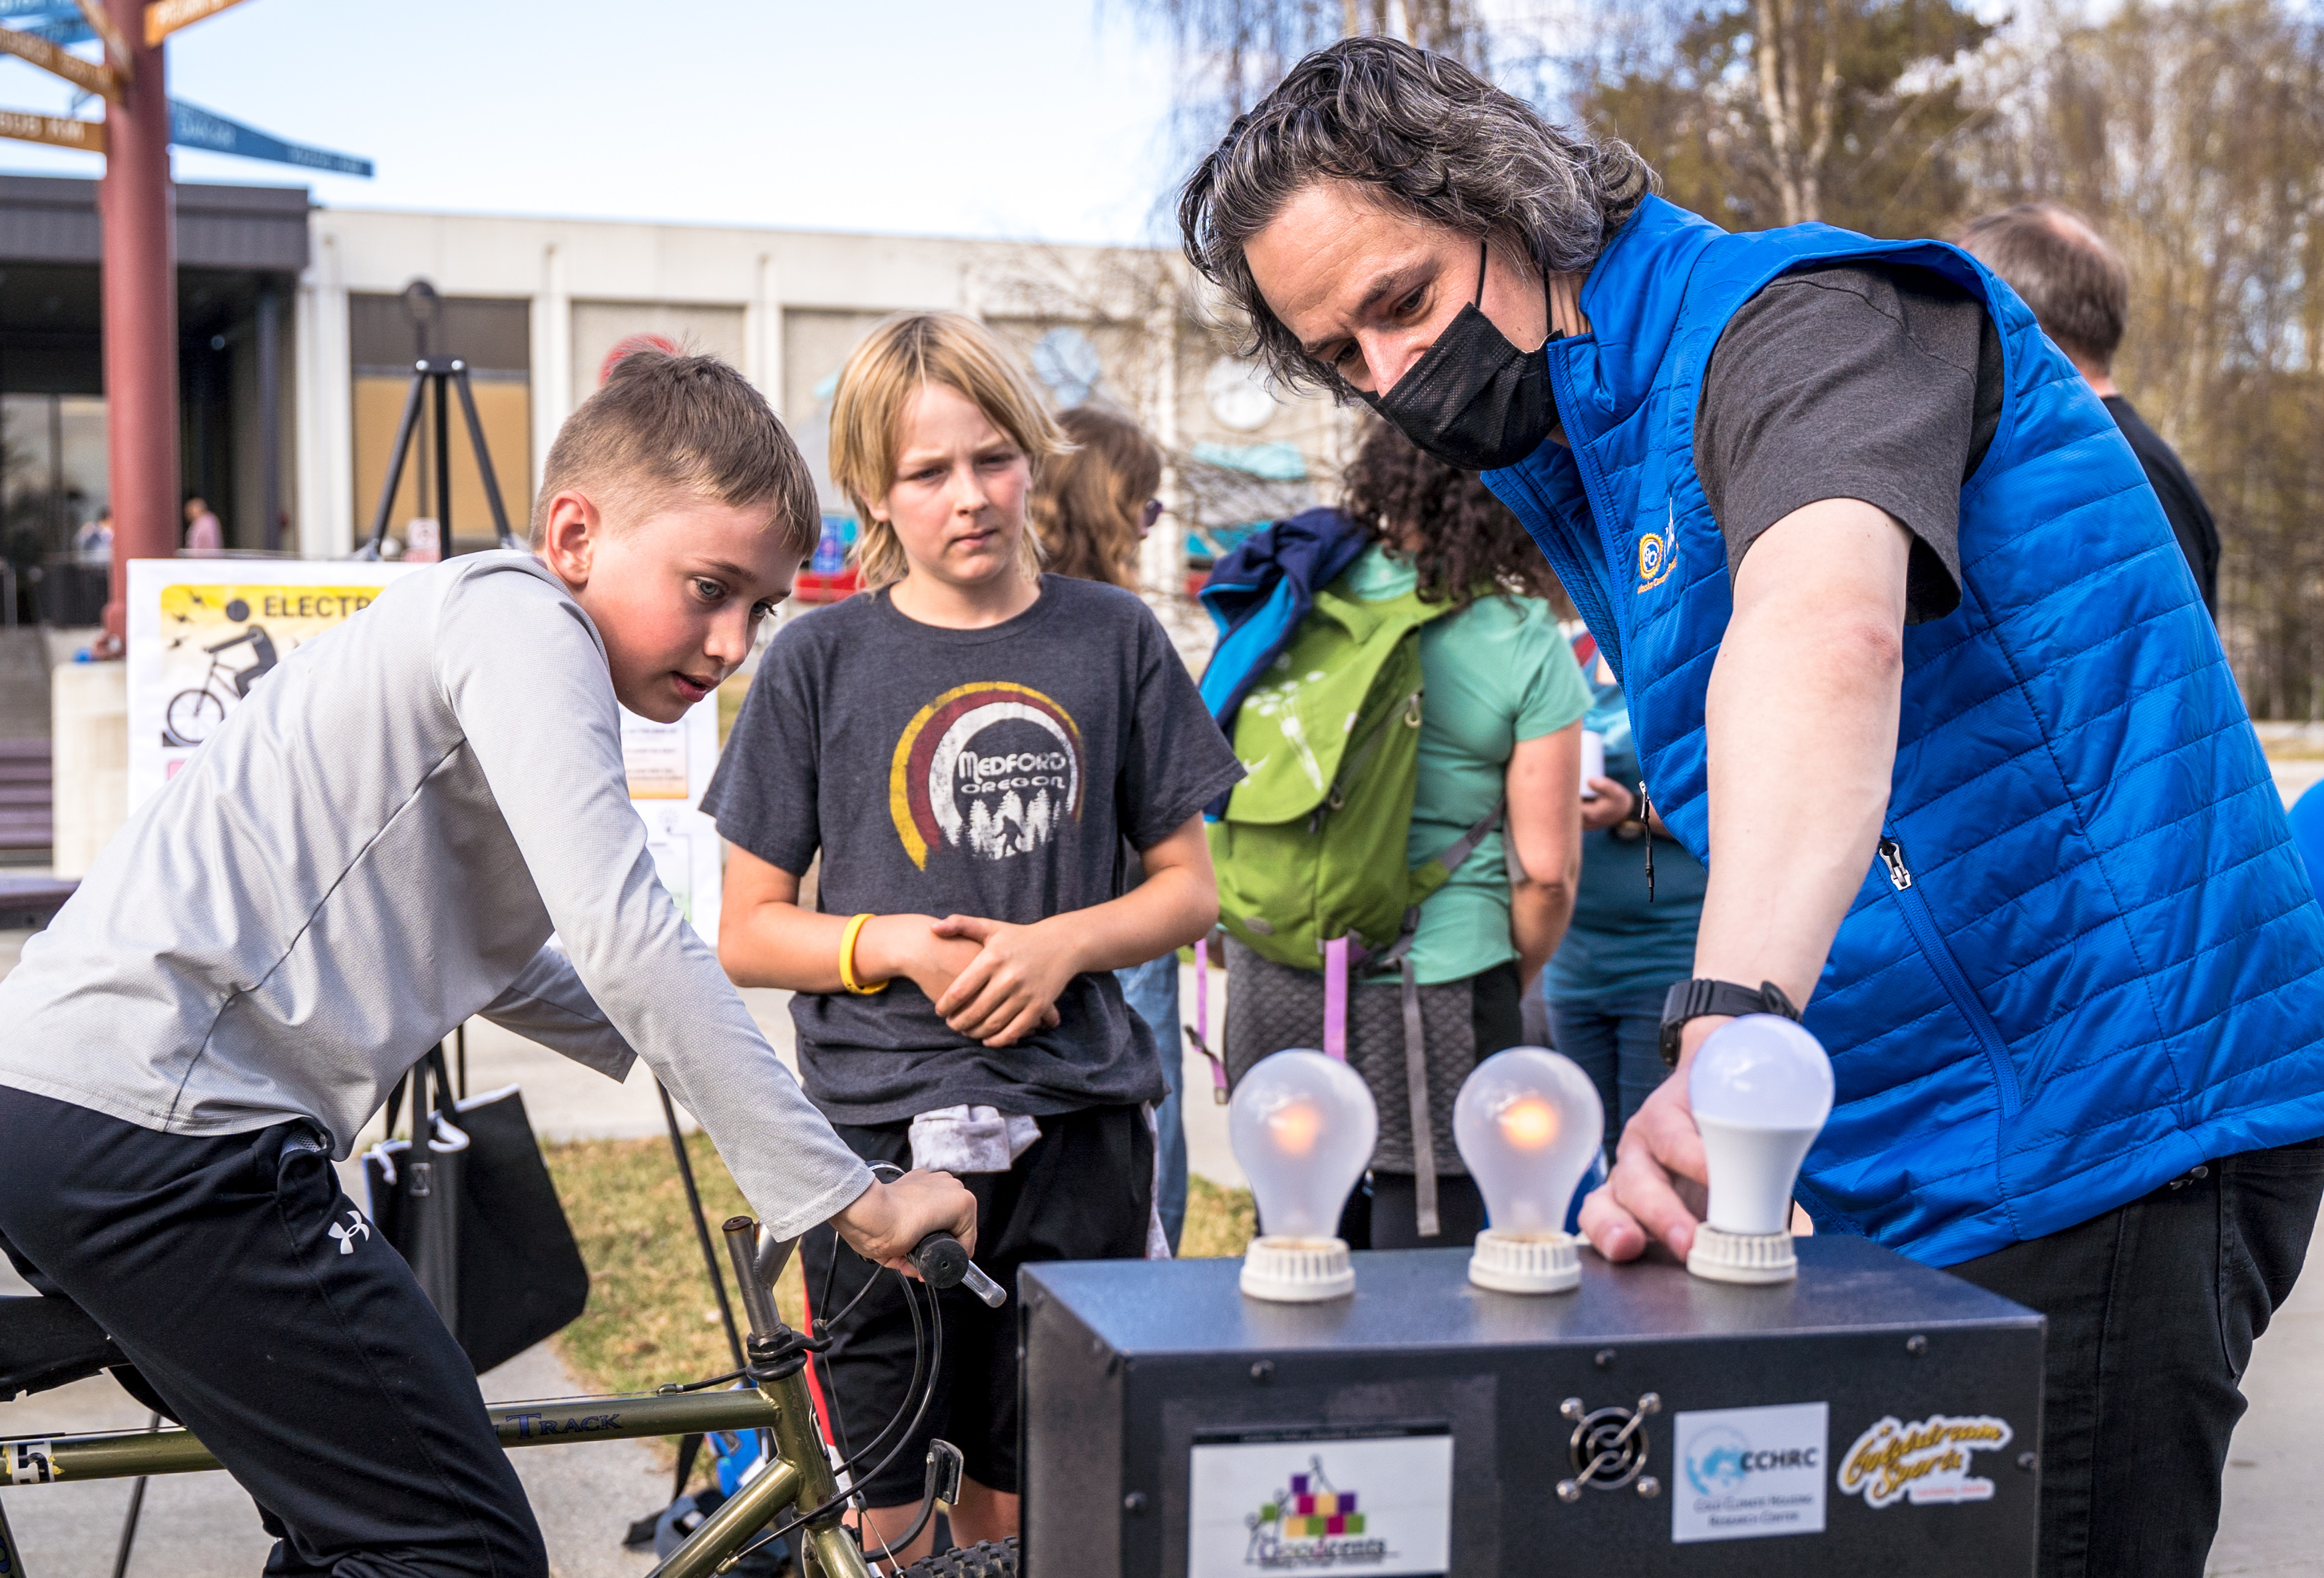 Research, Community, and Free Ice Cream — UAF’s Arctic Research Open House was a Sun-Shining Success!